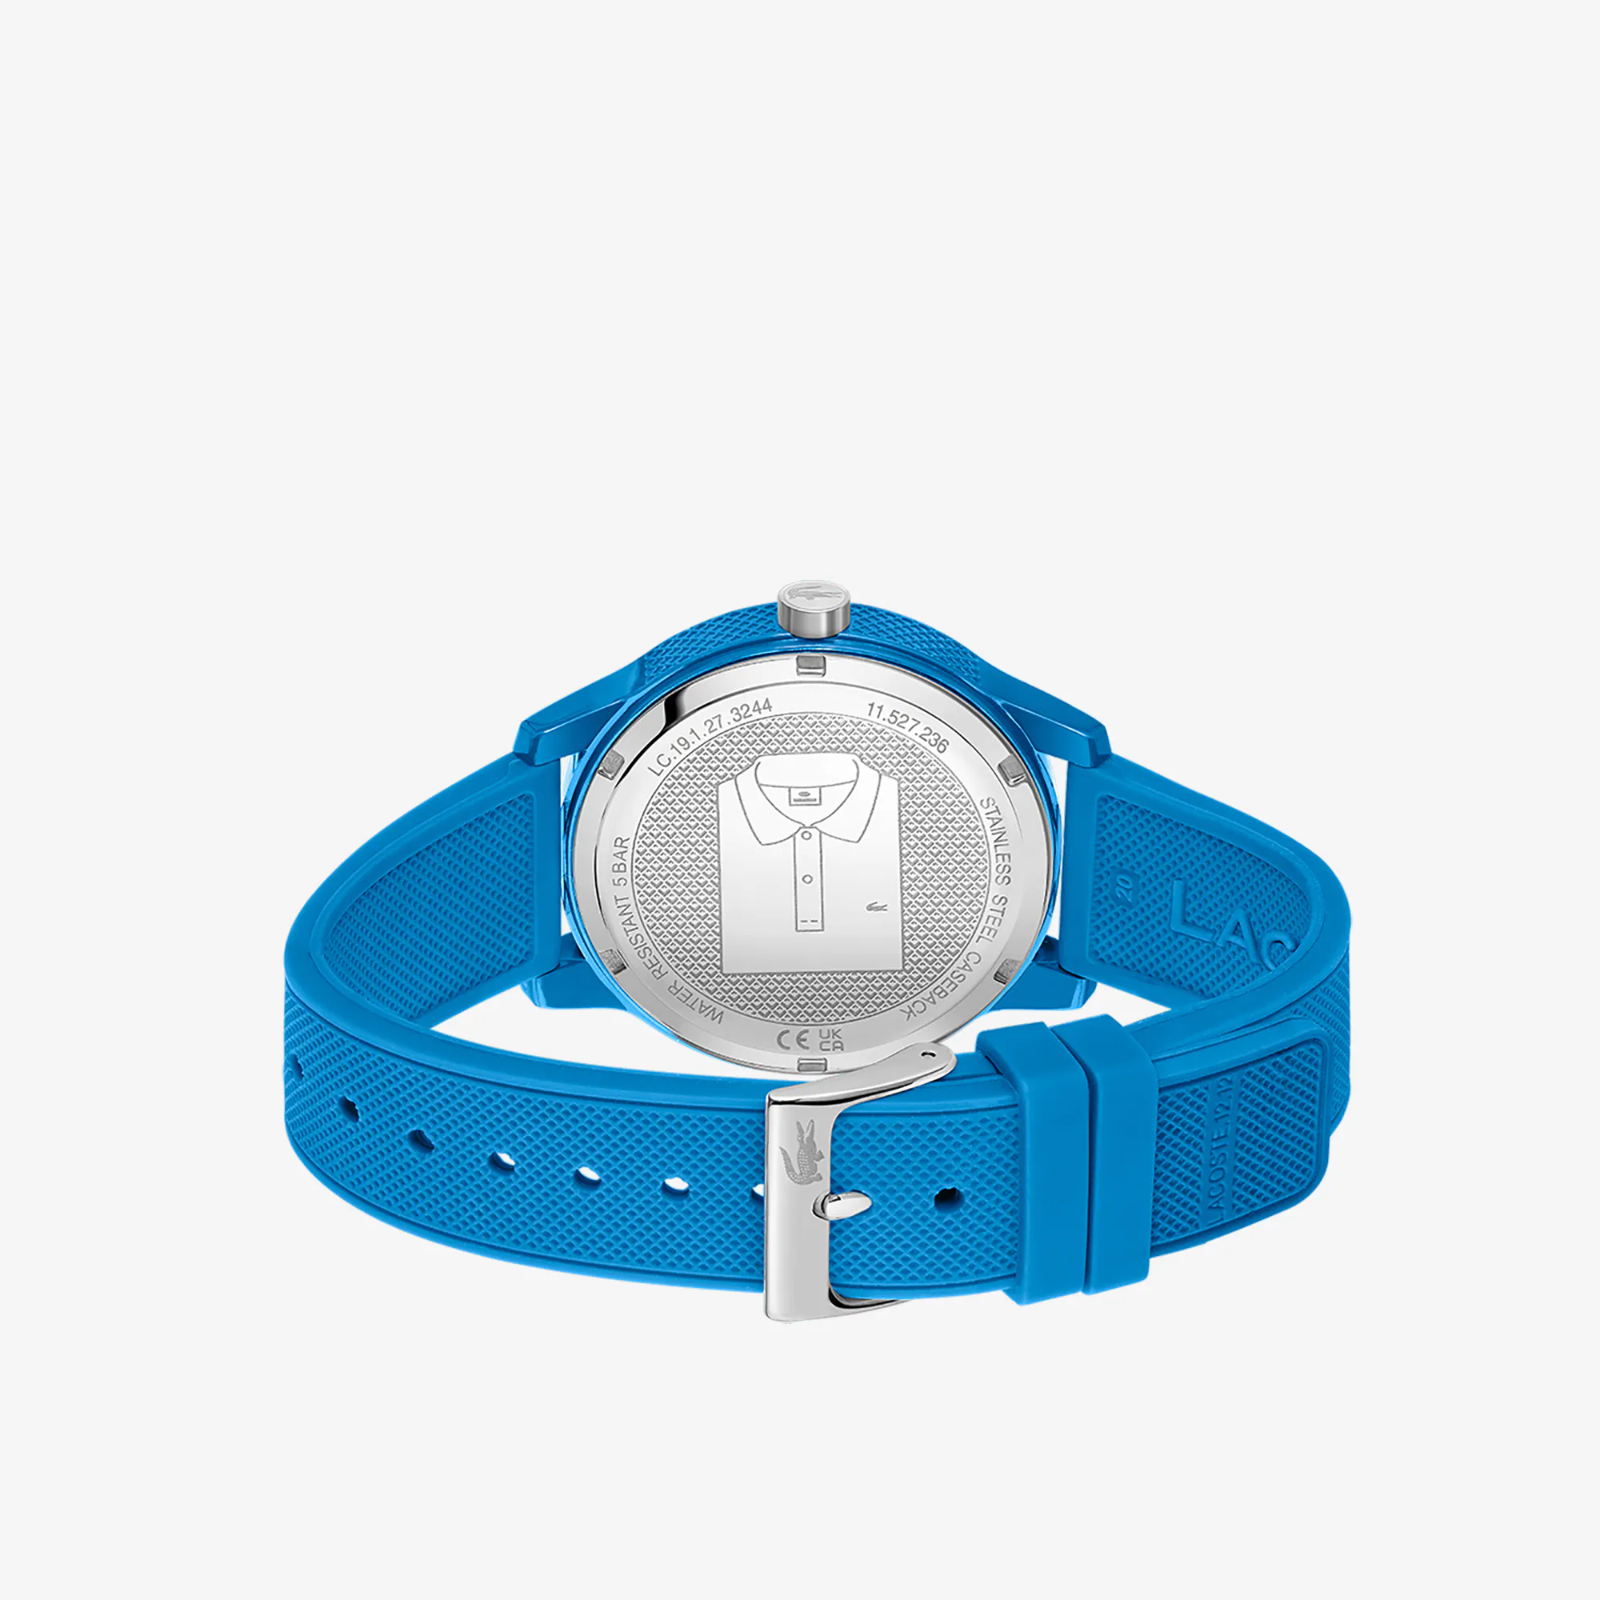 Unisex Lacoste L.12.12 3 Hands Blue Silicone Watch 2011193